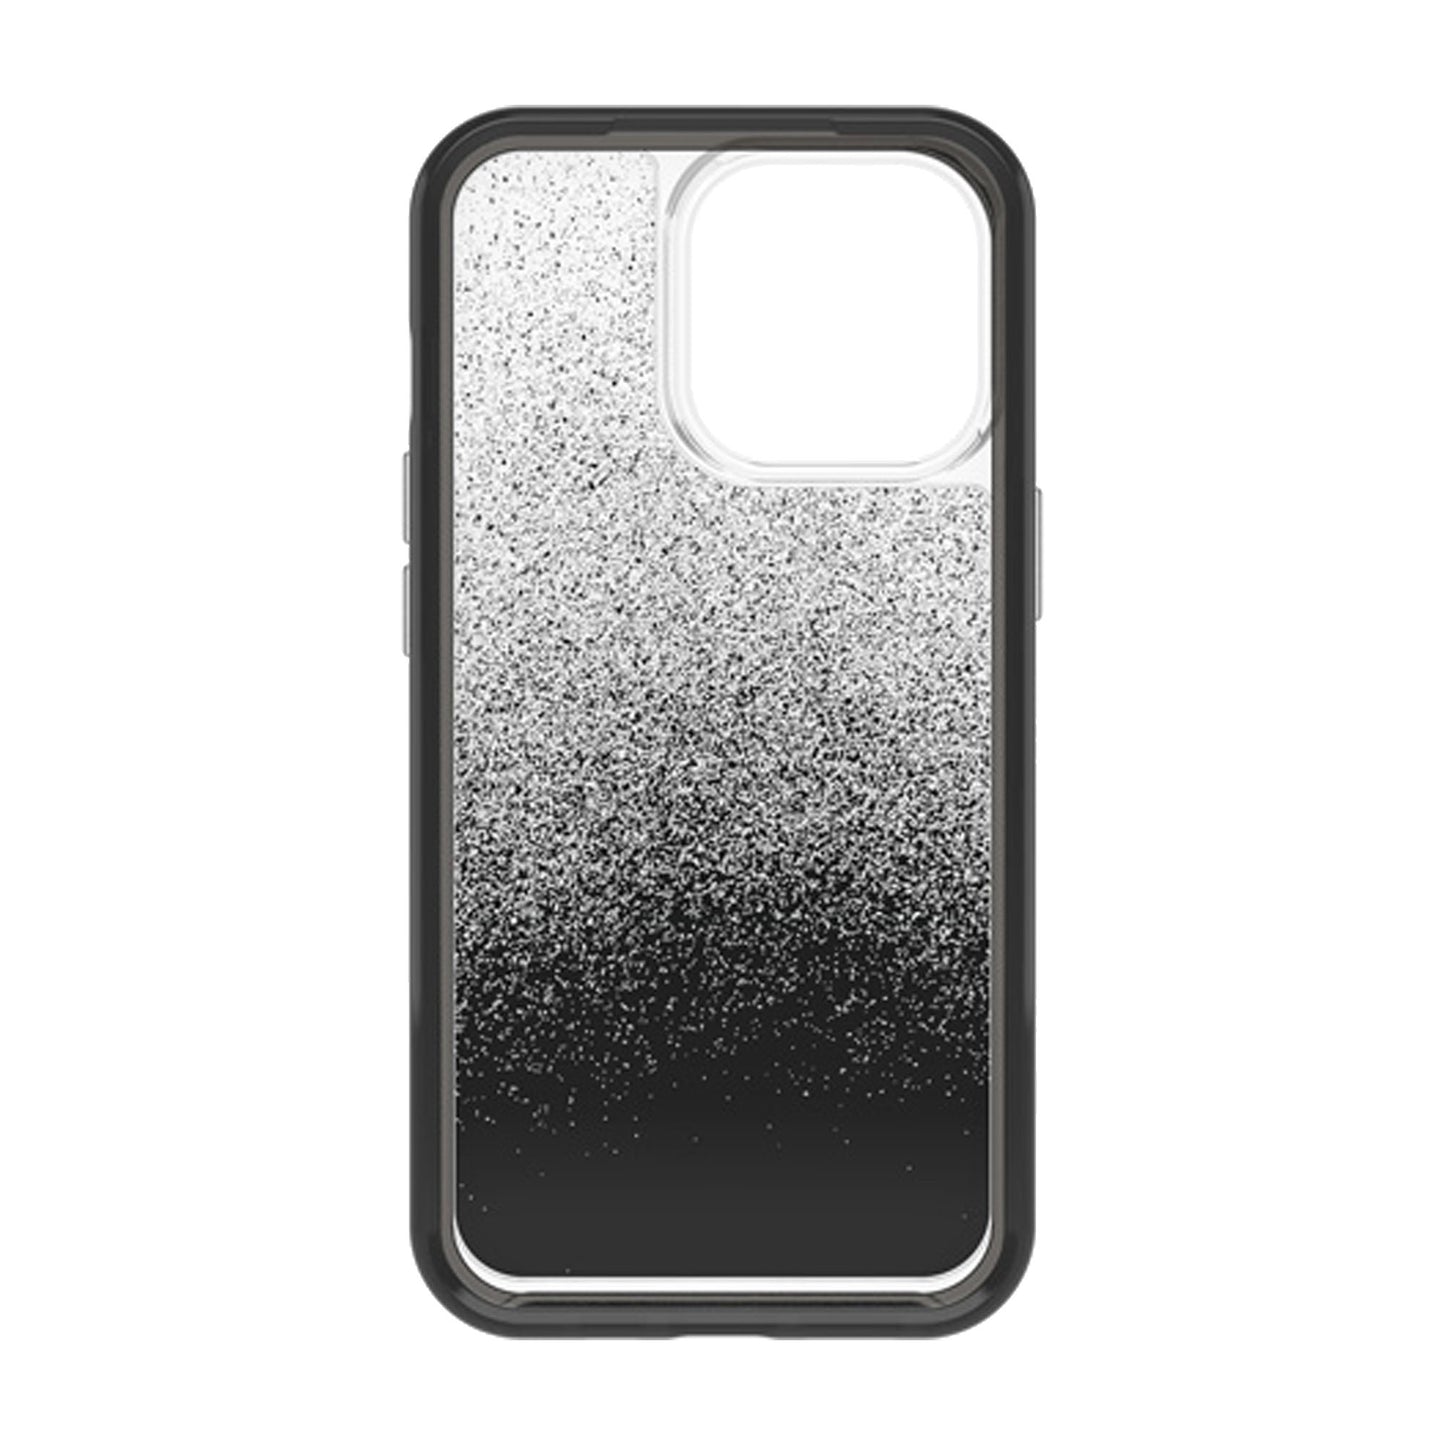 Otterbox Symmetry Clear for iPhone 13 Pro 6.1" 5G - Antimicrobial Case - Ombre Spray (Barcode: 840104265284 )